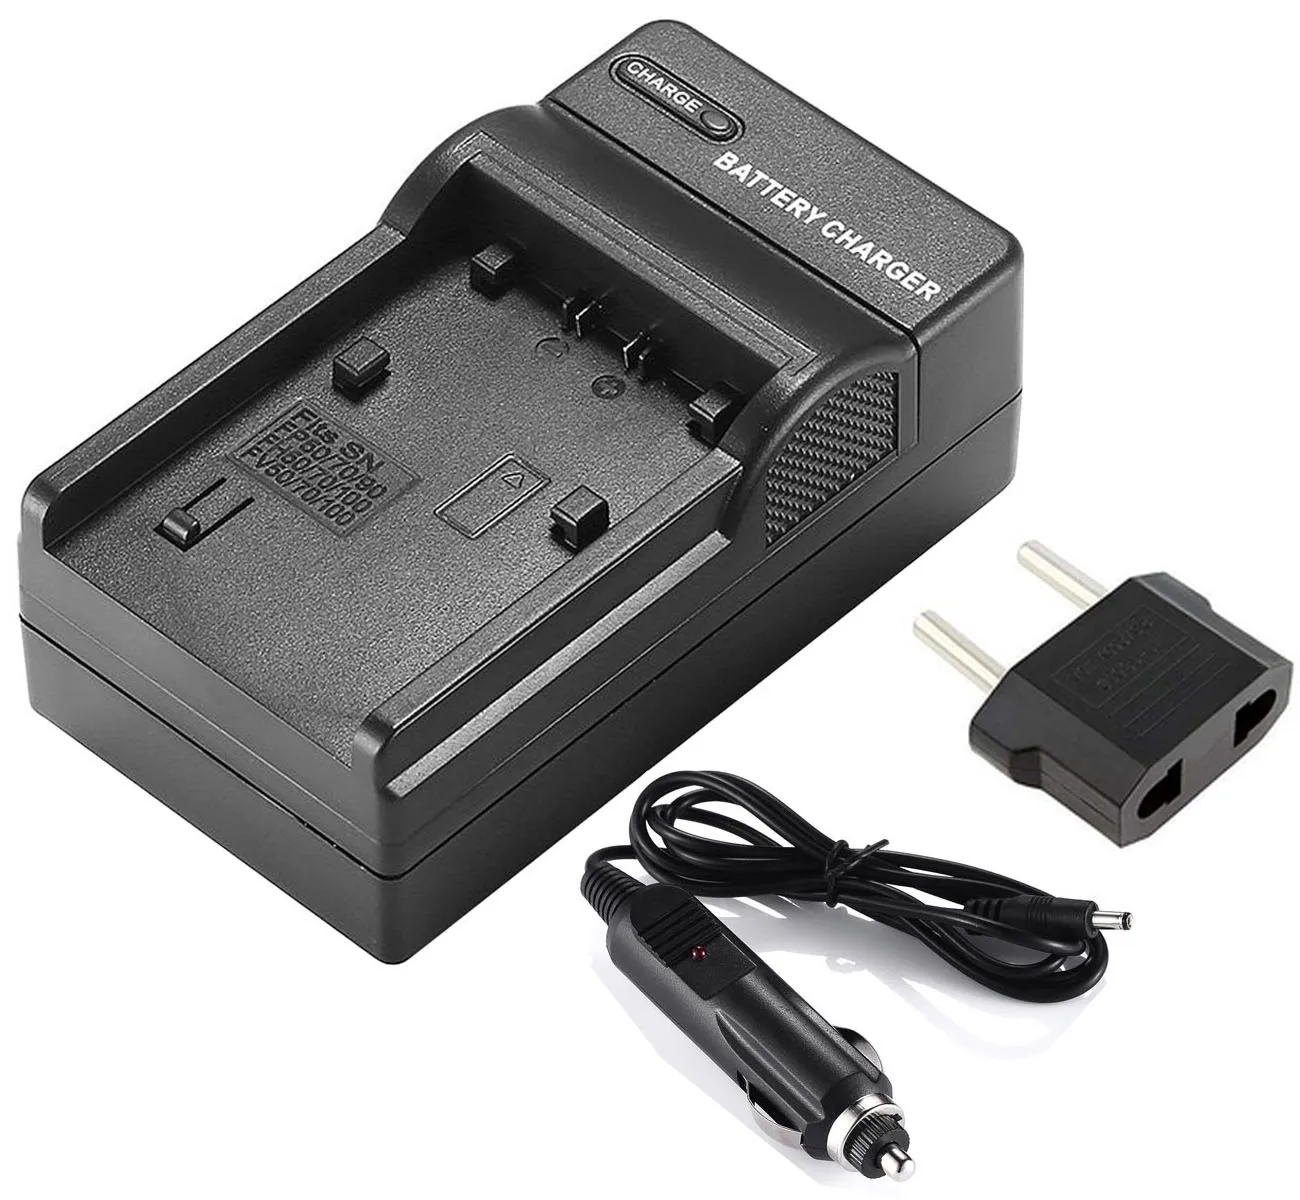 Camera Battery Mains and Car Charger with UK EU Plugs for Sony NP-FP50 FP70 FP90 